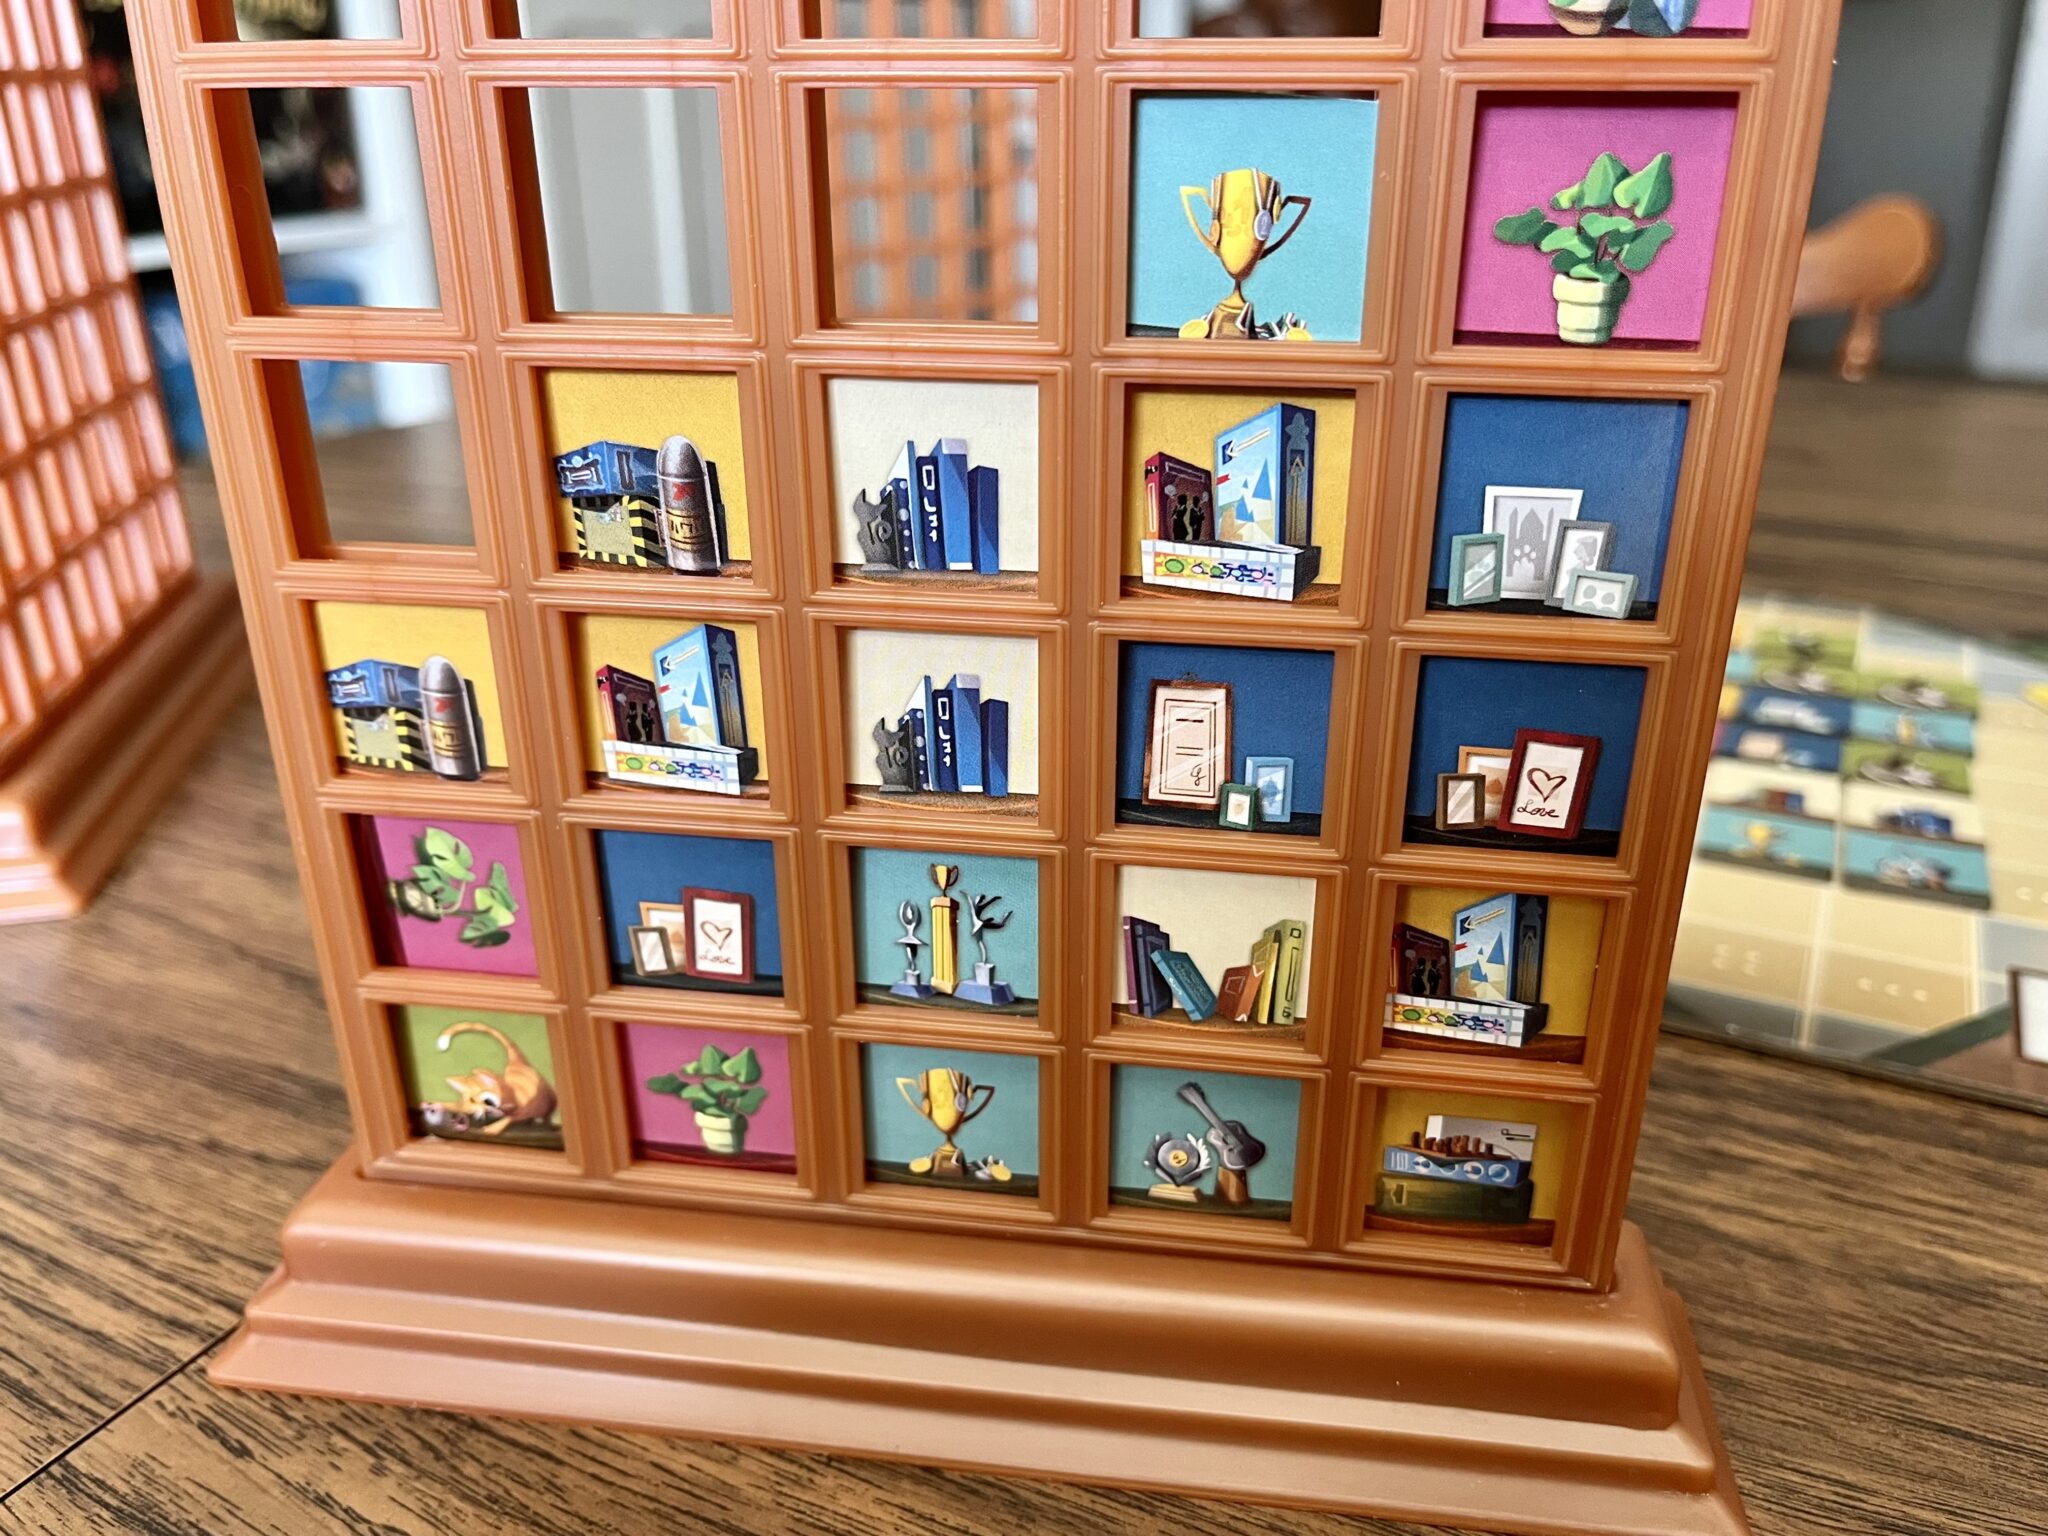 My Shelfie close up on plastic tray with tiles 